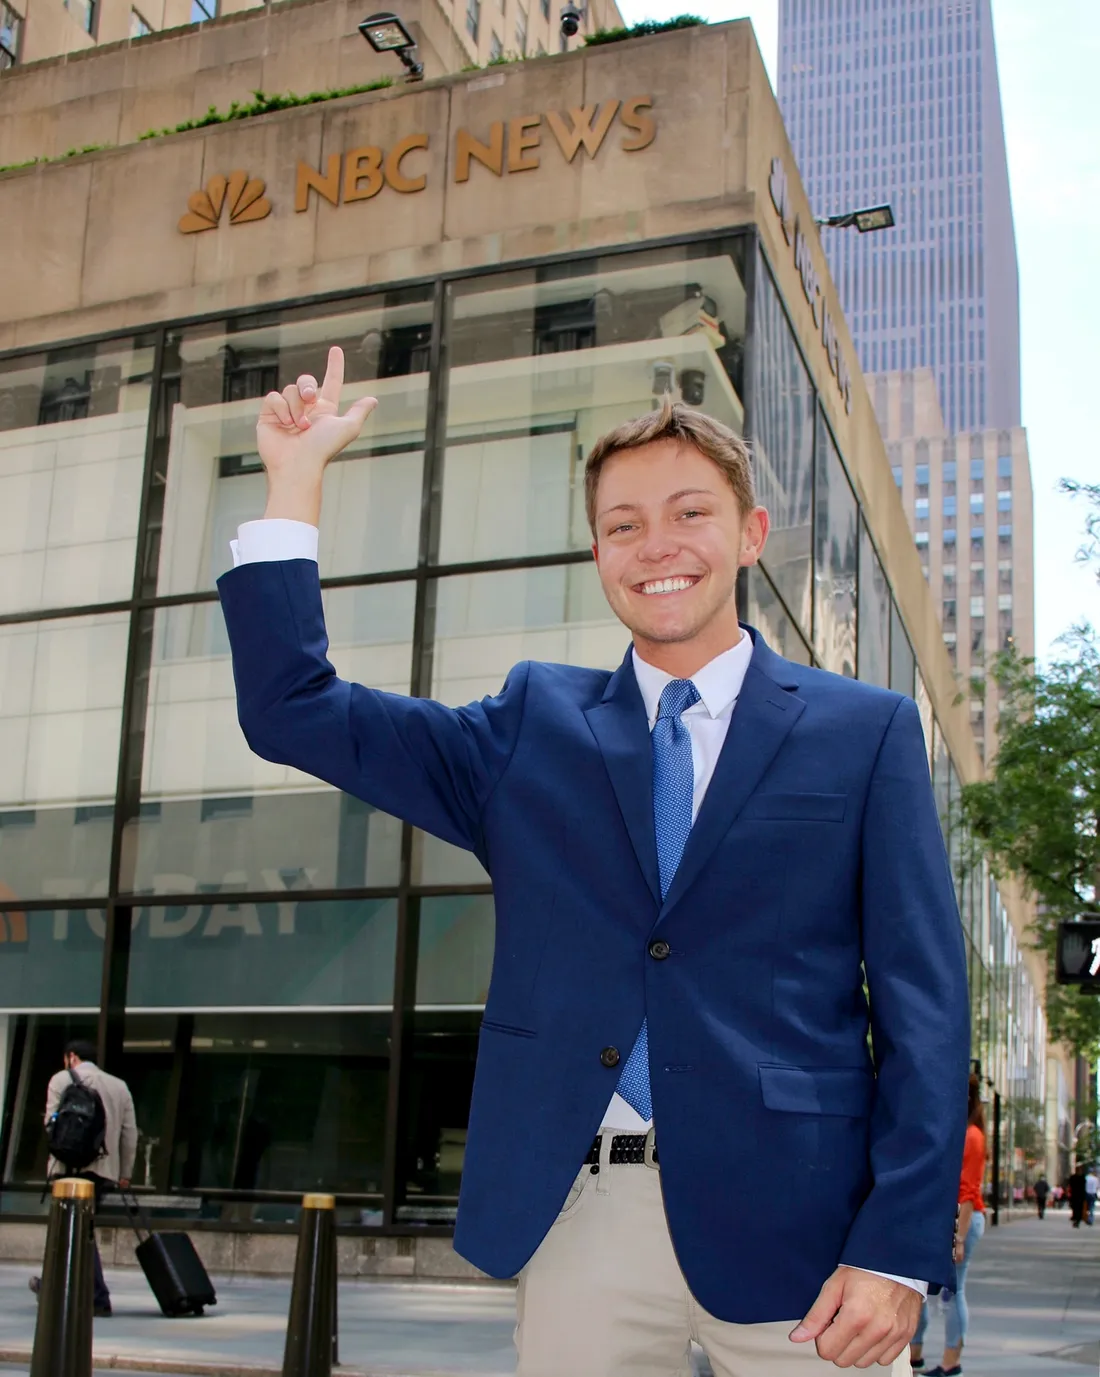 Daniel Wood poses in front of NBC News building in NYC where he participated in a summer internship